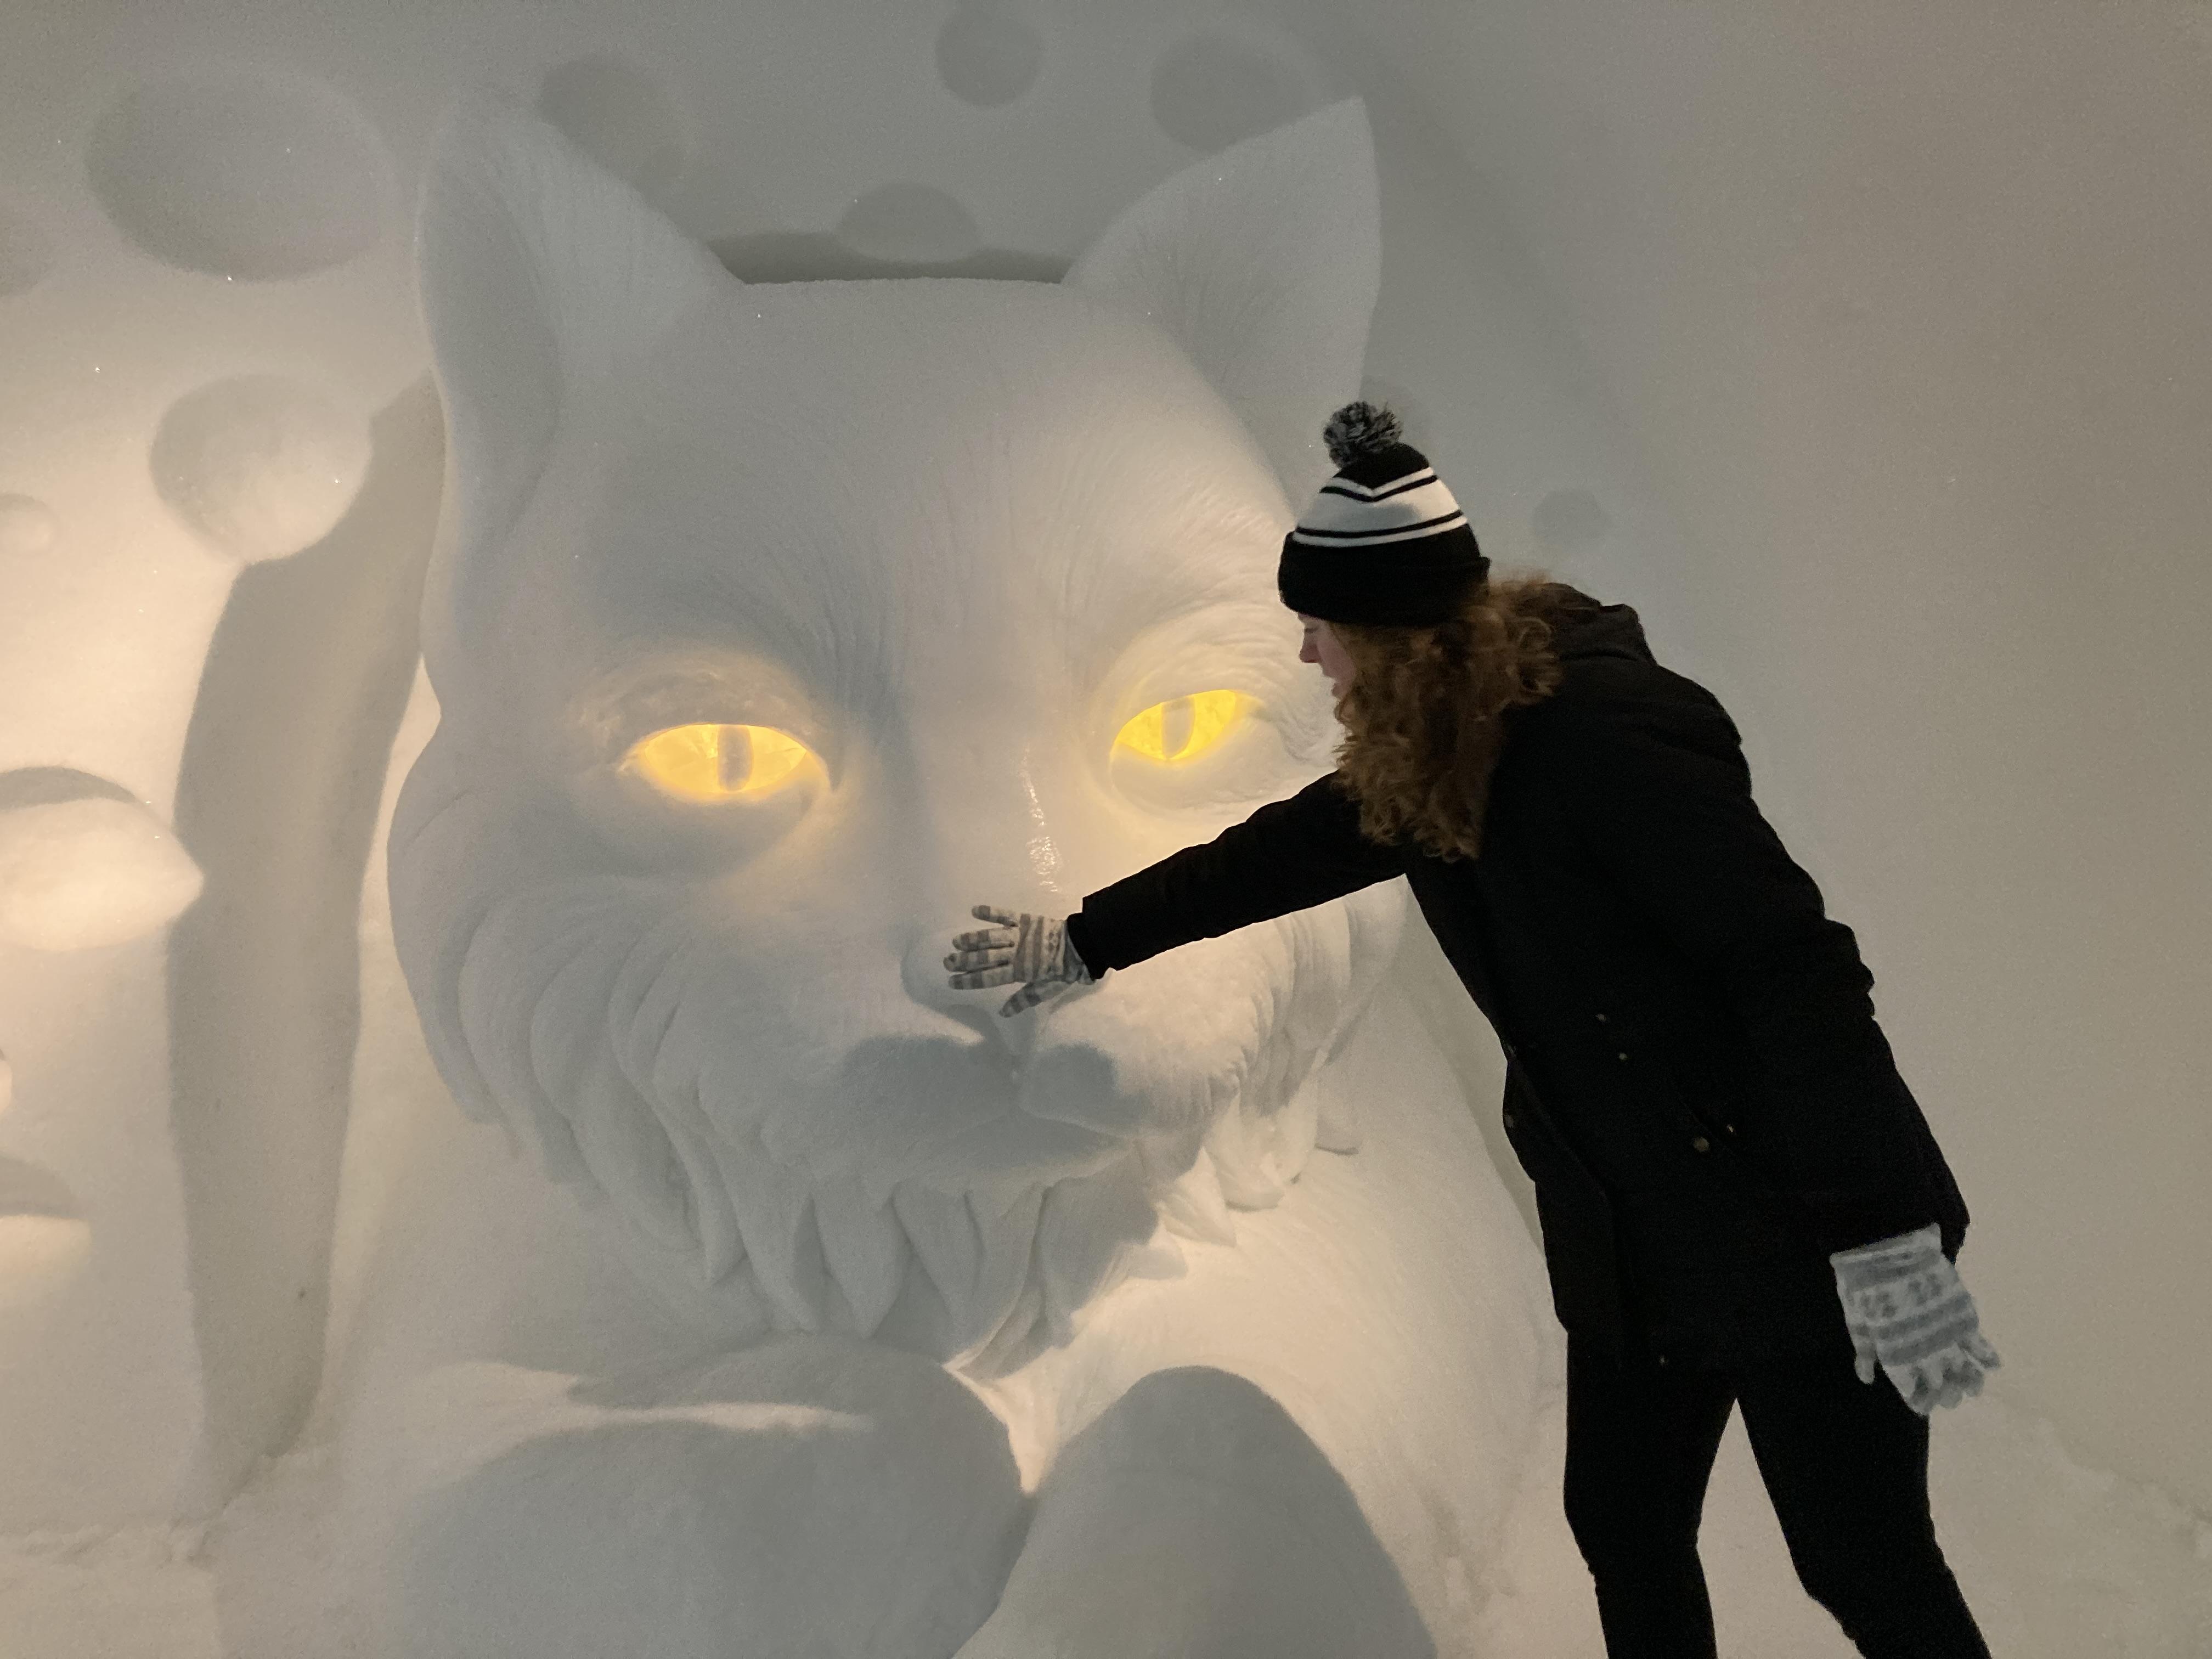 Oswego student touches an ice sculpture of a cat at the Icehotel in Sweden.